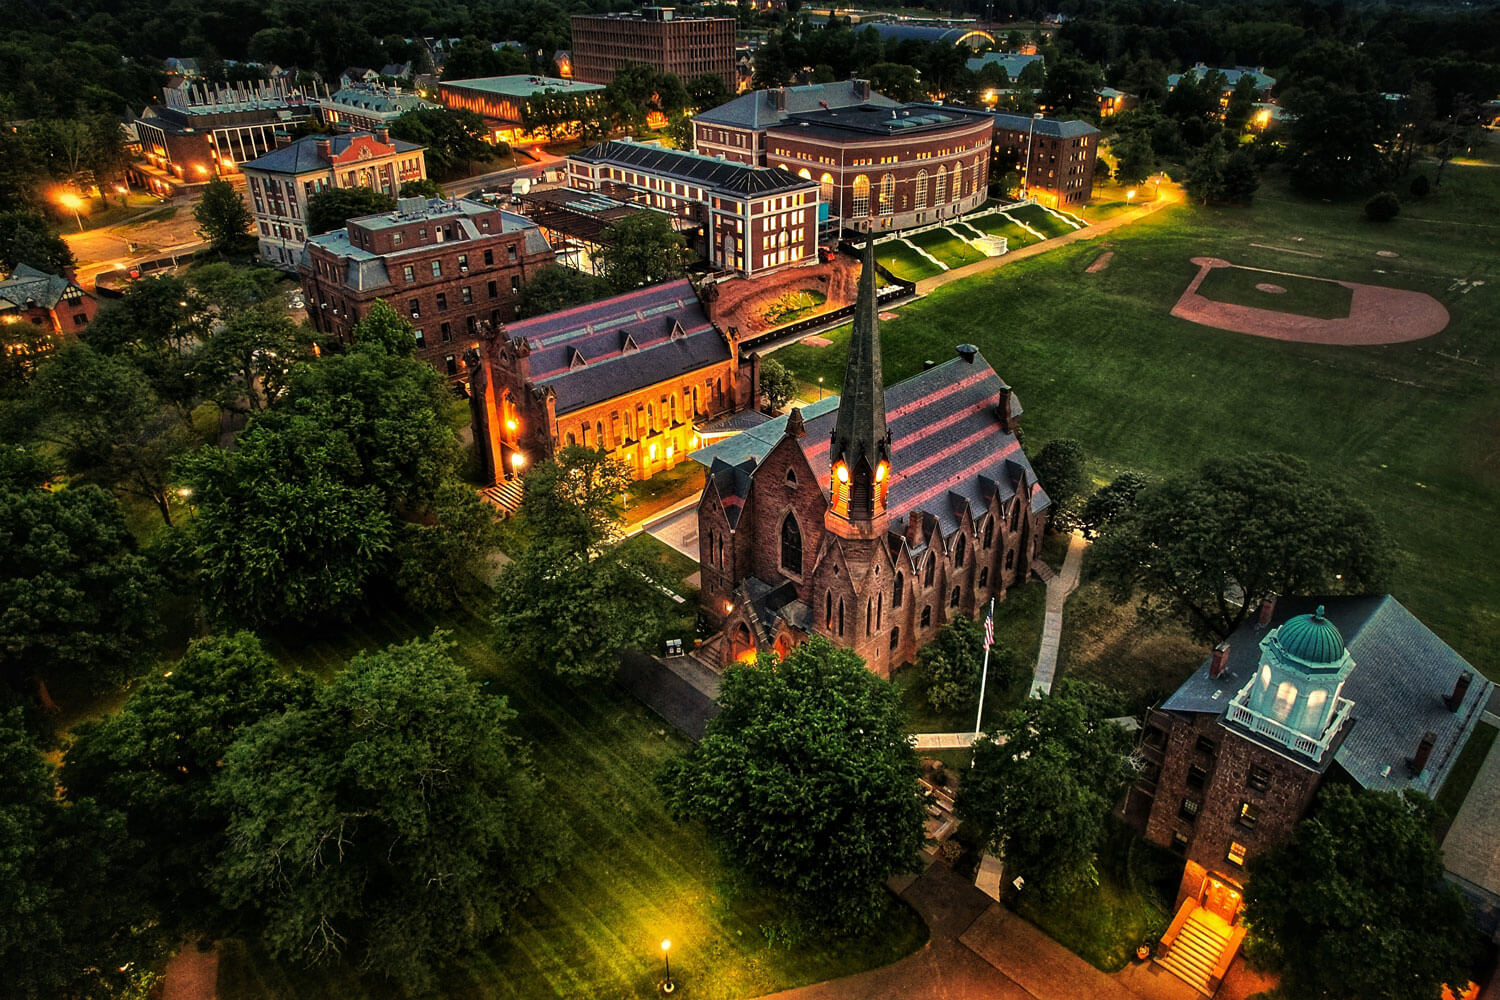 An aerial view of the Wesleyan University campus in Middletown, Connecticut, at night. The buildings are illuminated, with walkways and trees visible throughout the grounds